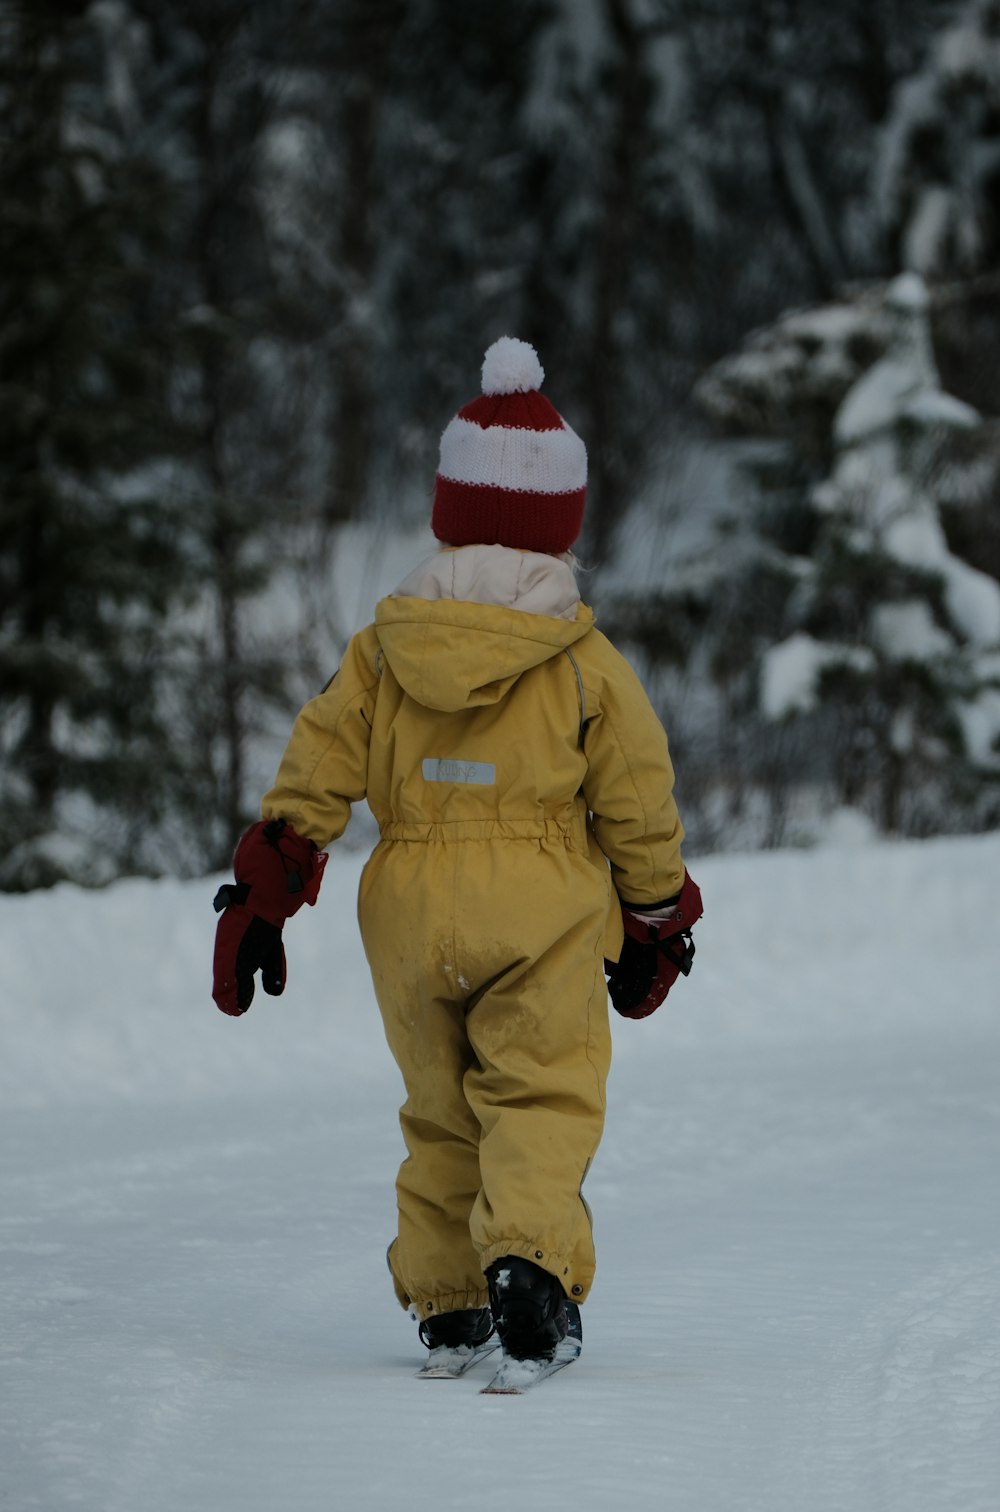 a small child in a yellow snowsuit walking in the snow